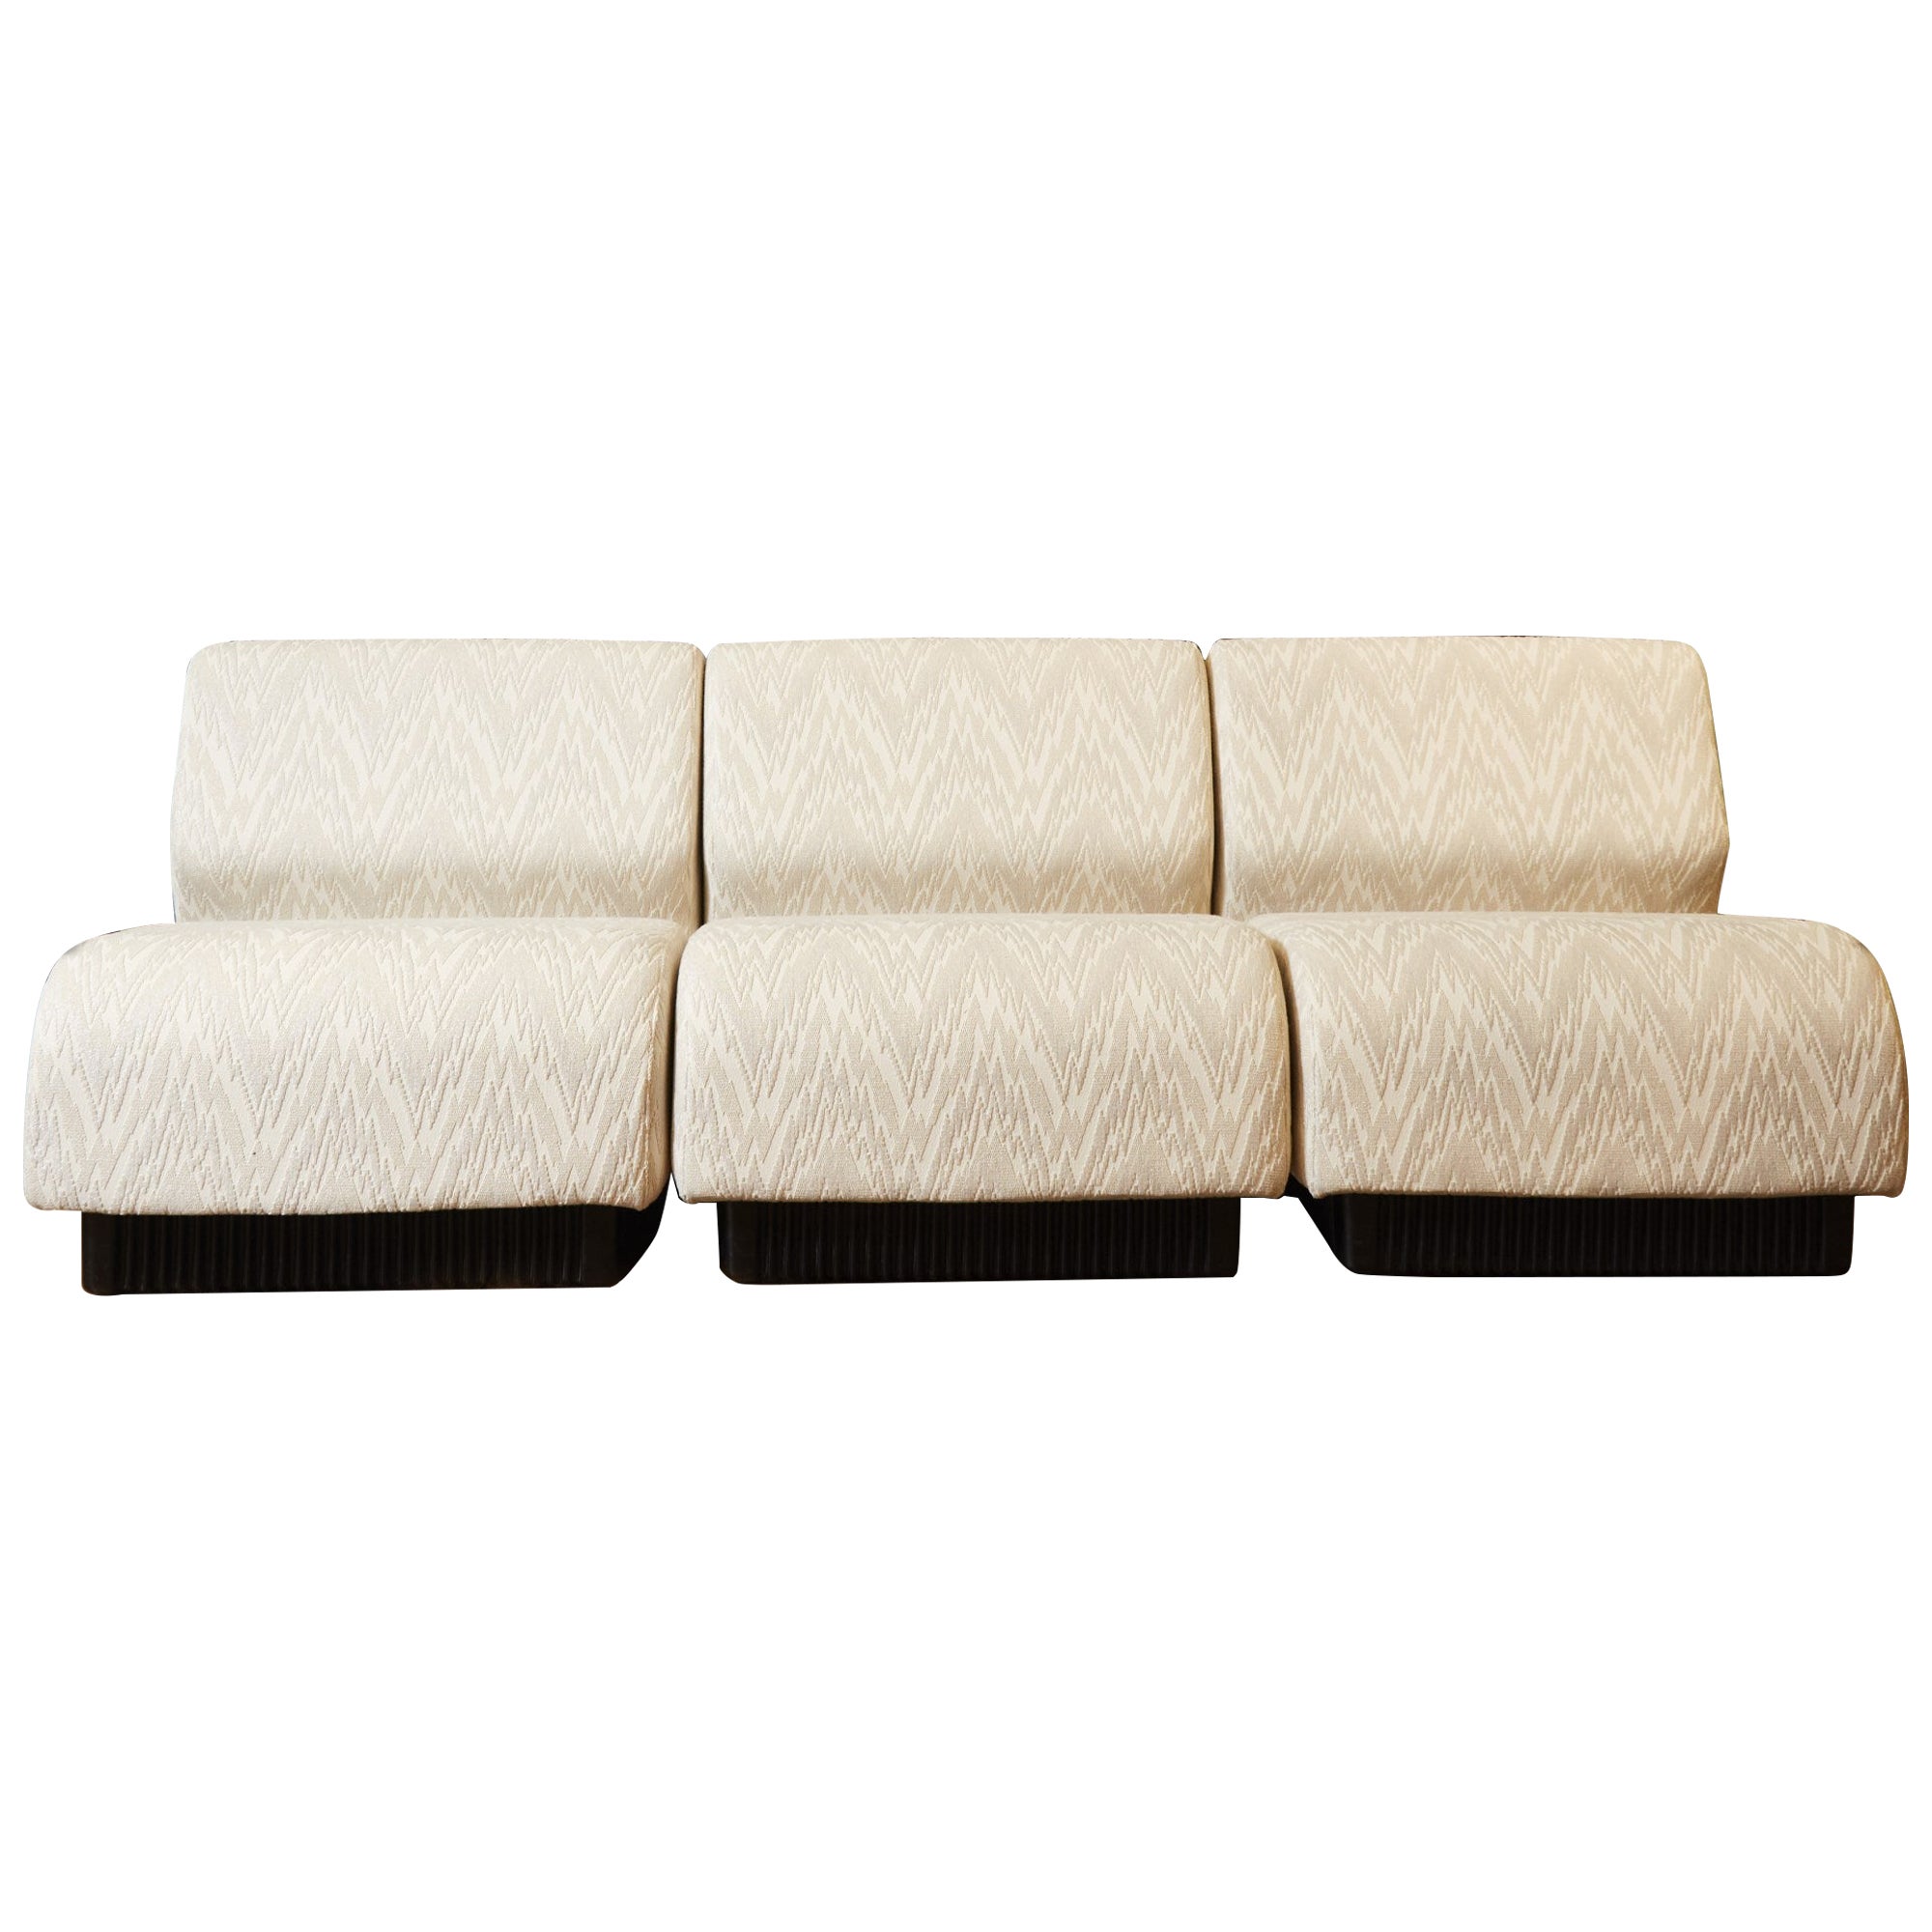 Modular sofa in 4 parts by Herman Miller At Cost Price